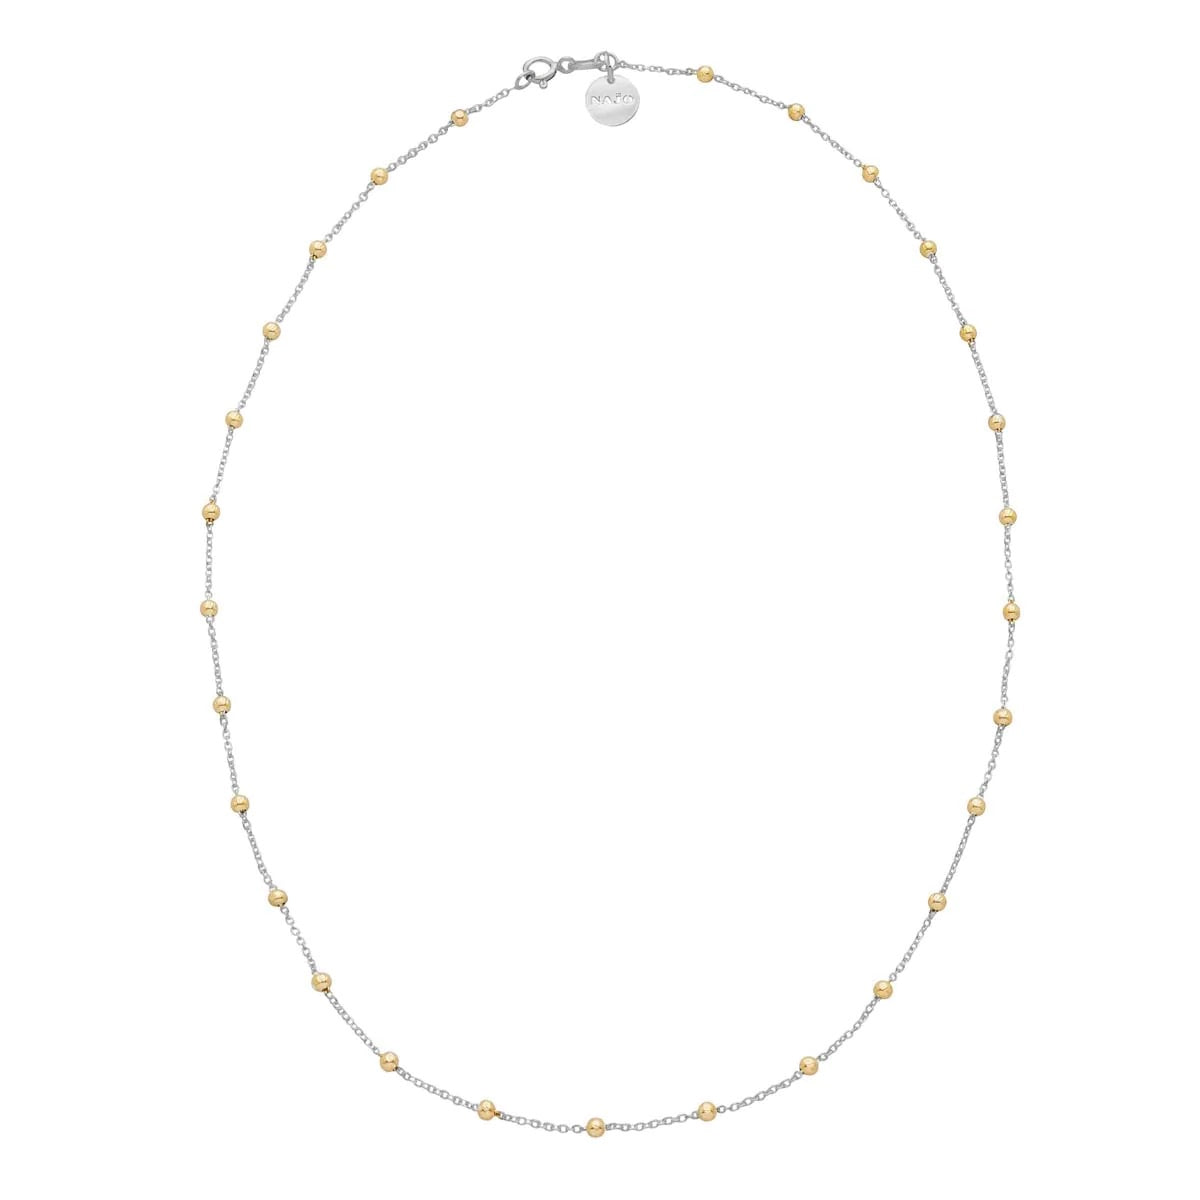 Najo N3244 Algonquin Silver Necklace with Yellow Gold